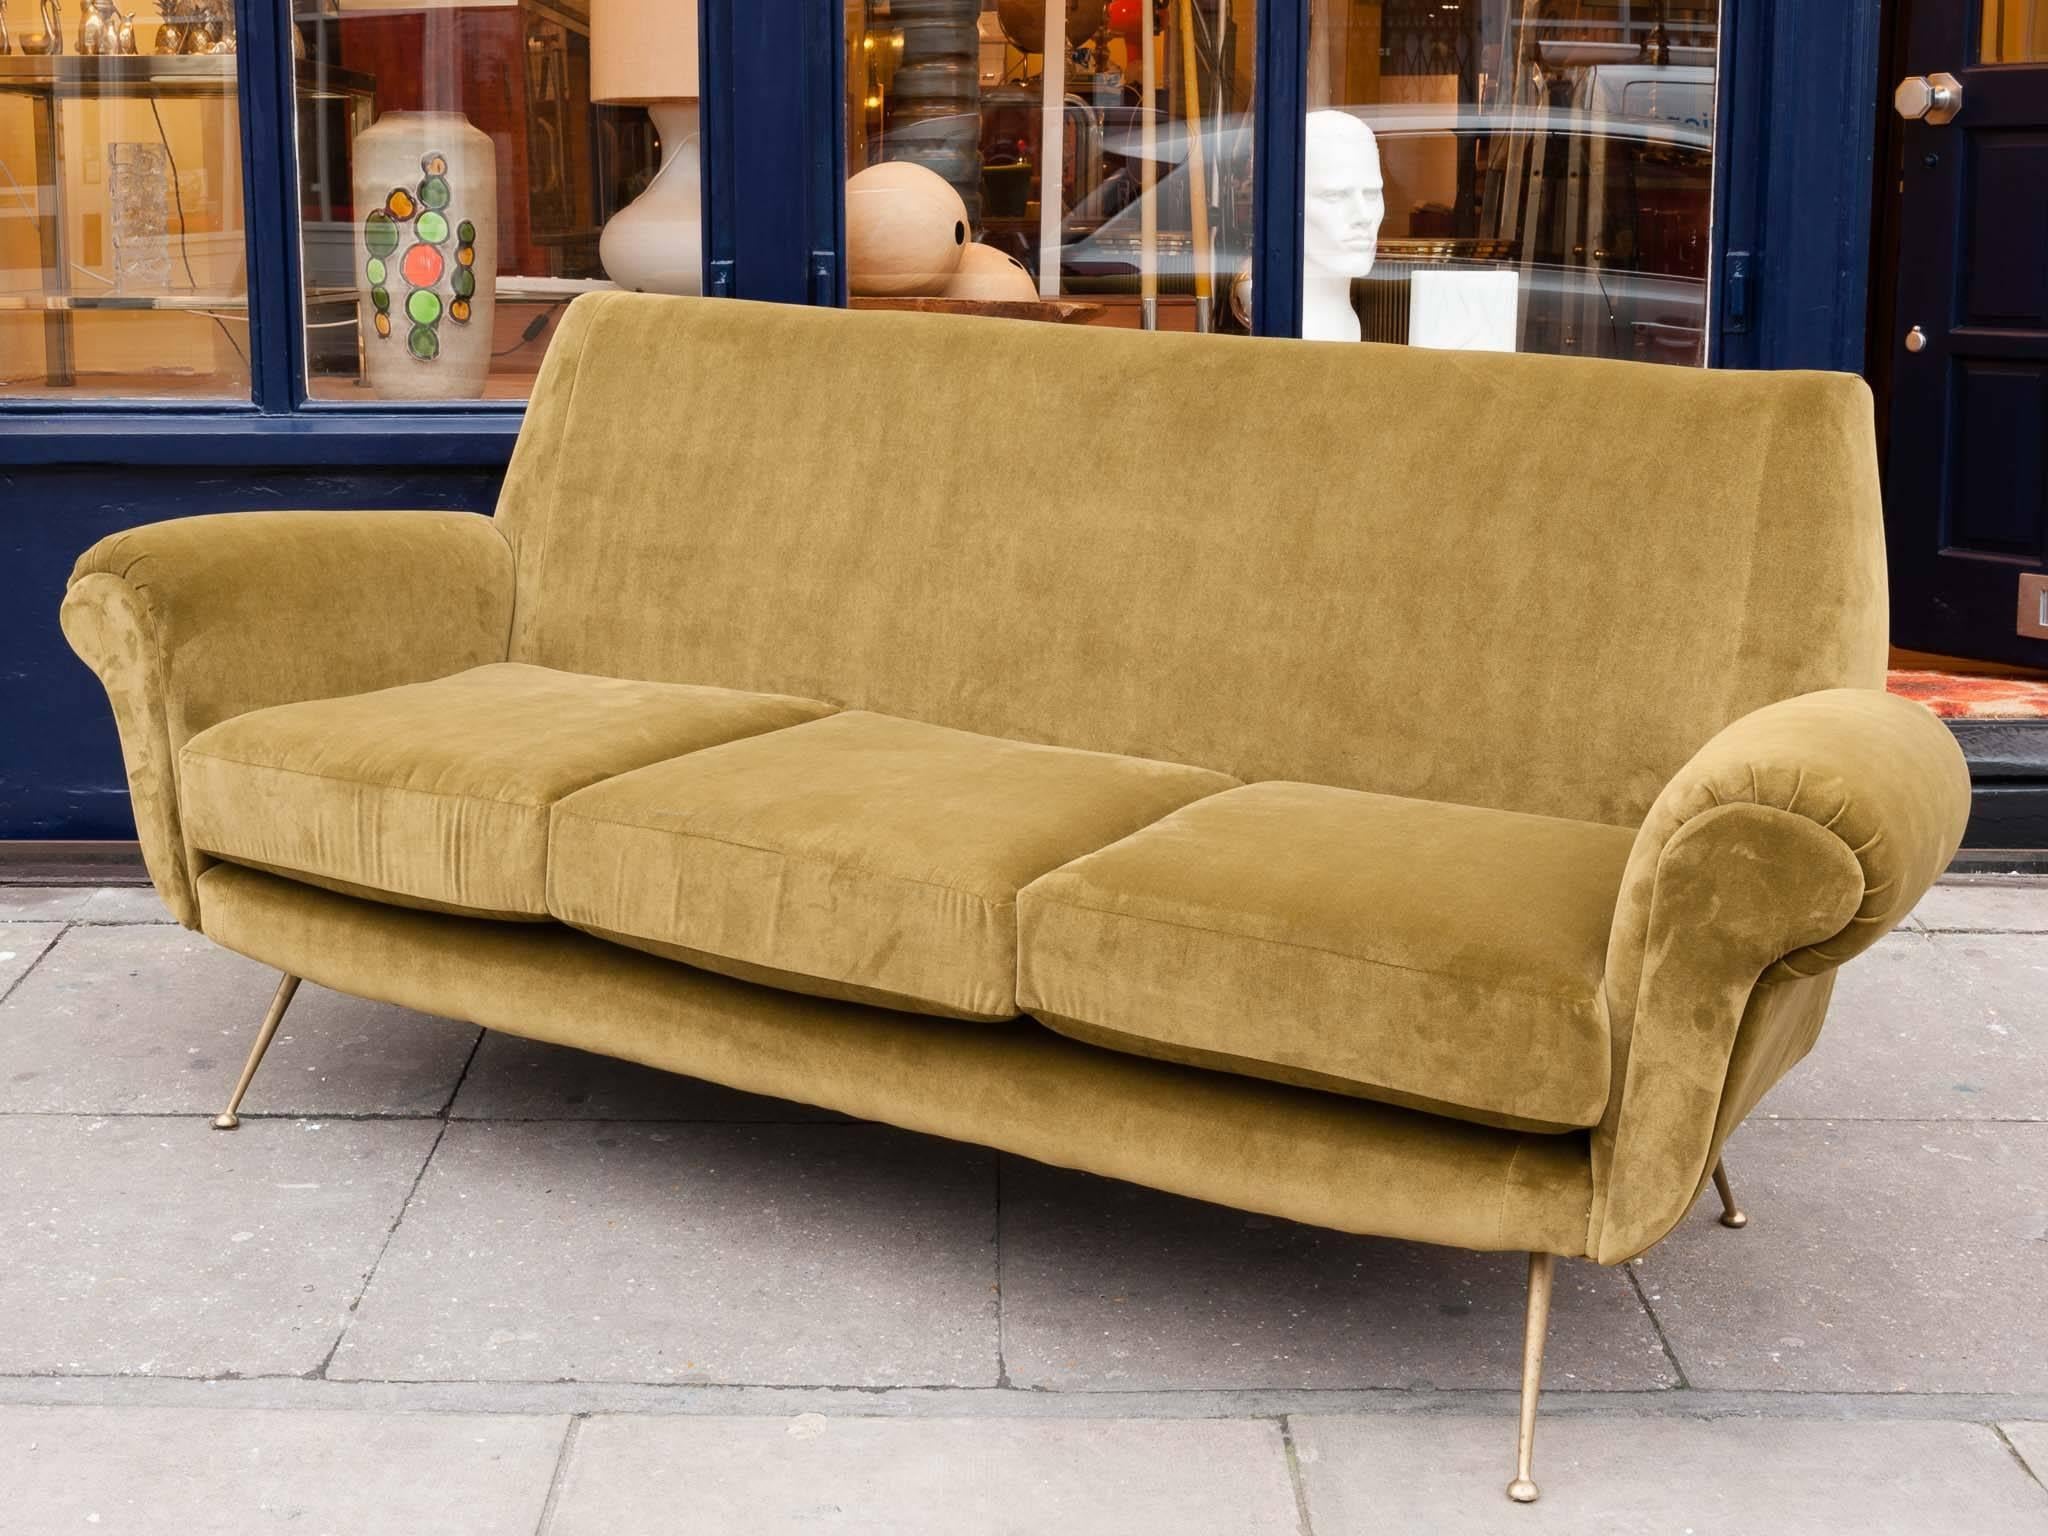 Midcentury 1950s three-seat Italian sofa, with four brass tapered feature legs. Newly upholstered in a moss green deep velvet fabric with three removable cushions. Elegant, comfortable and functional. A wonderful sofa with curved arms and a deep